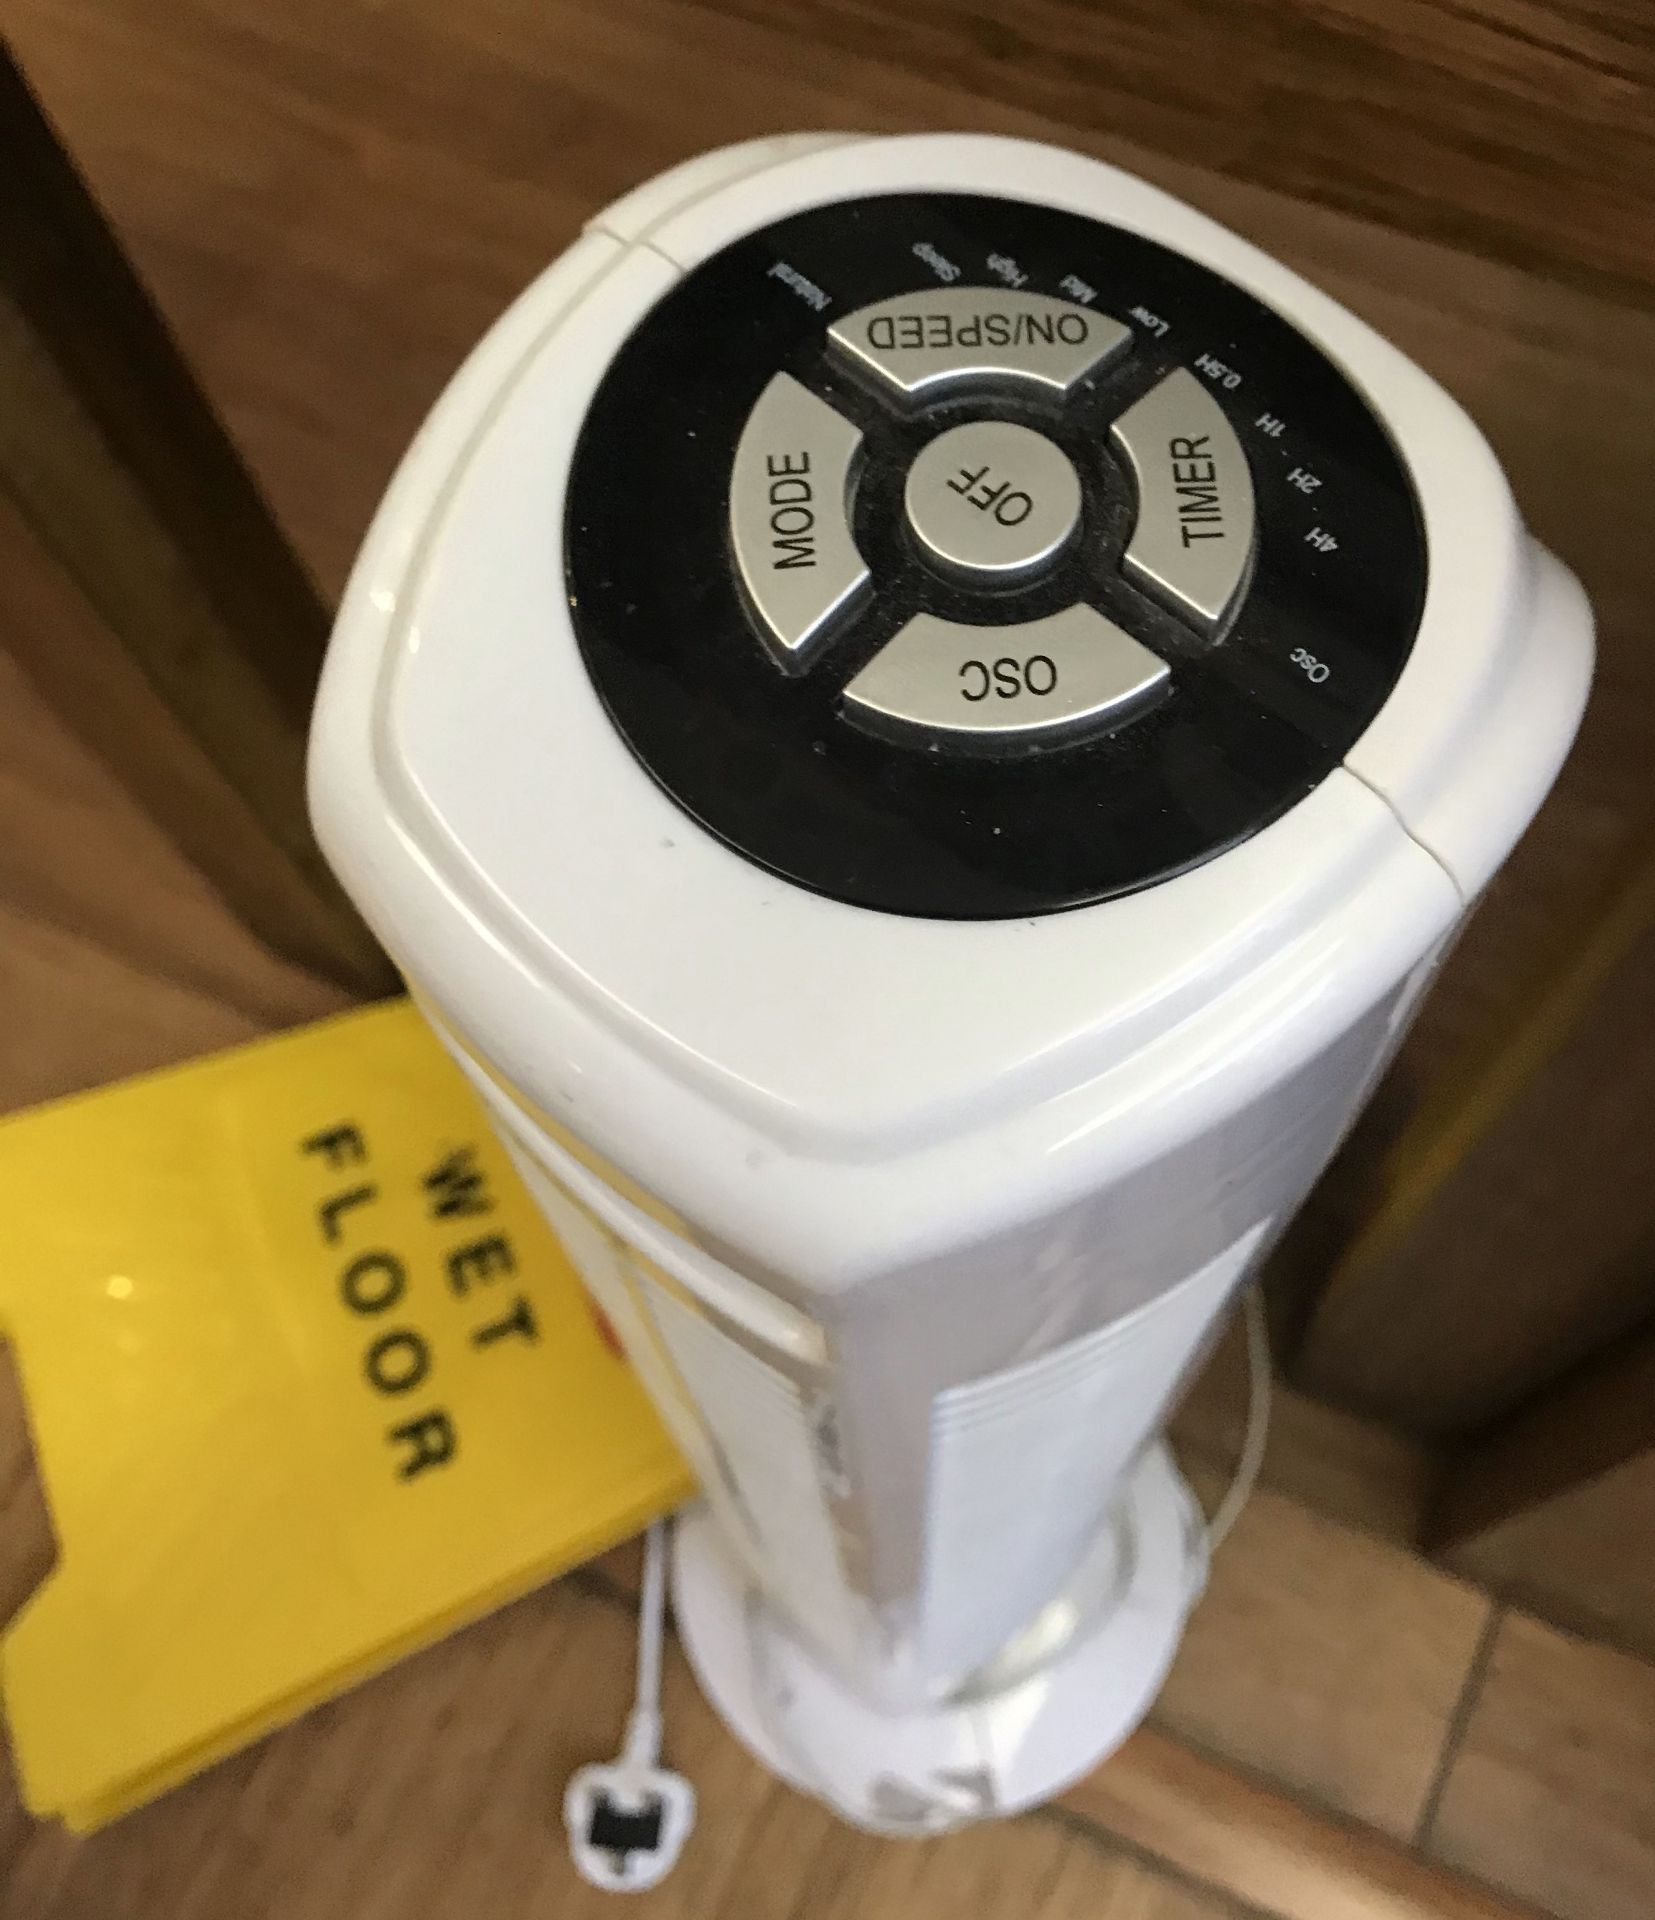 1 x Upright Oscillating Tower Fan Plus Wet Floor Sign - CL587 - Location: London WC2H This item is - Image 2 of 2